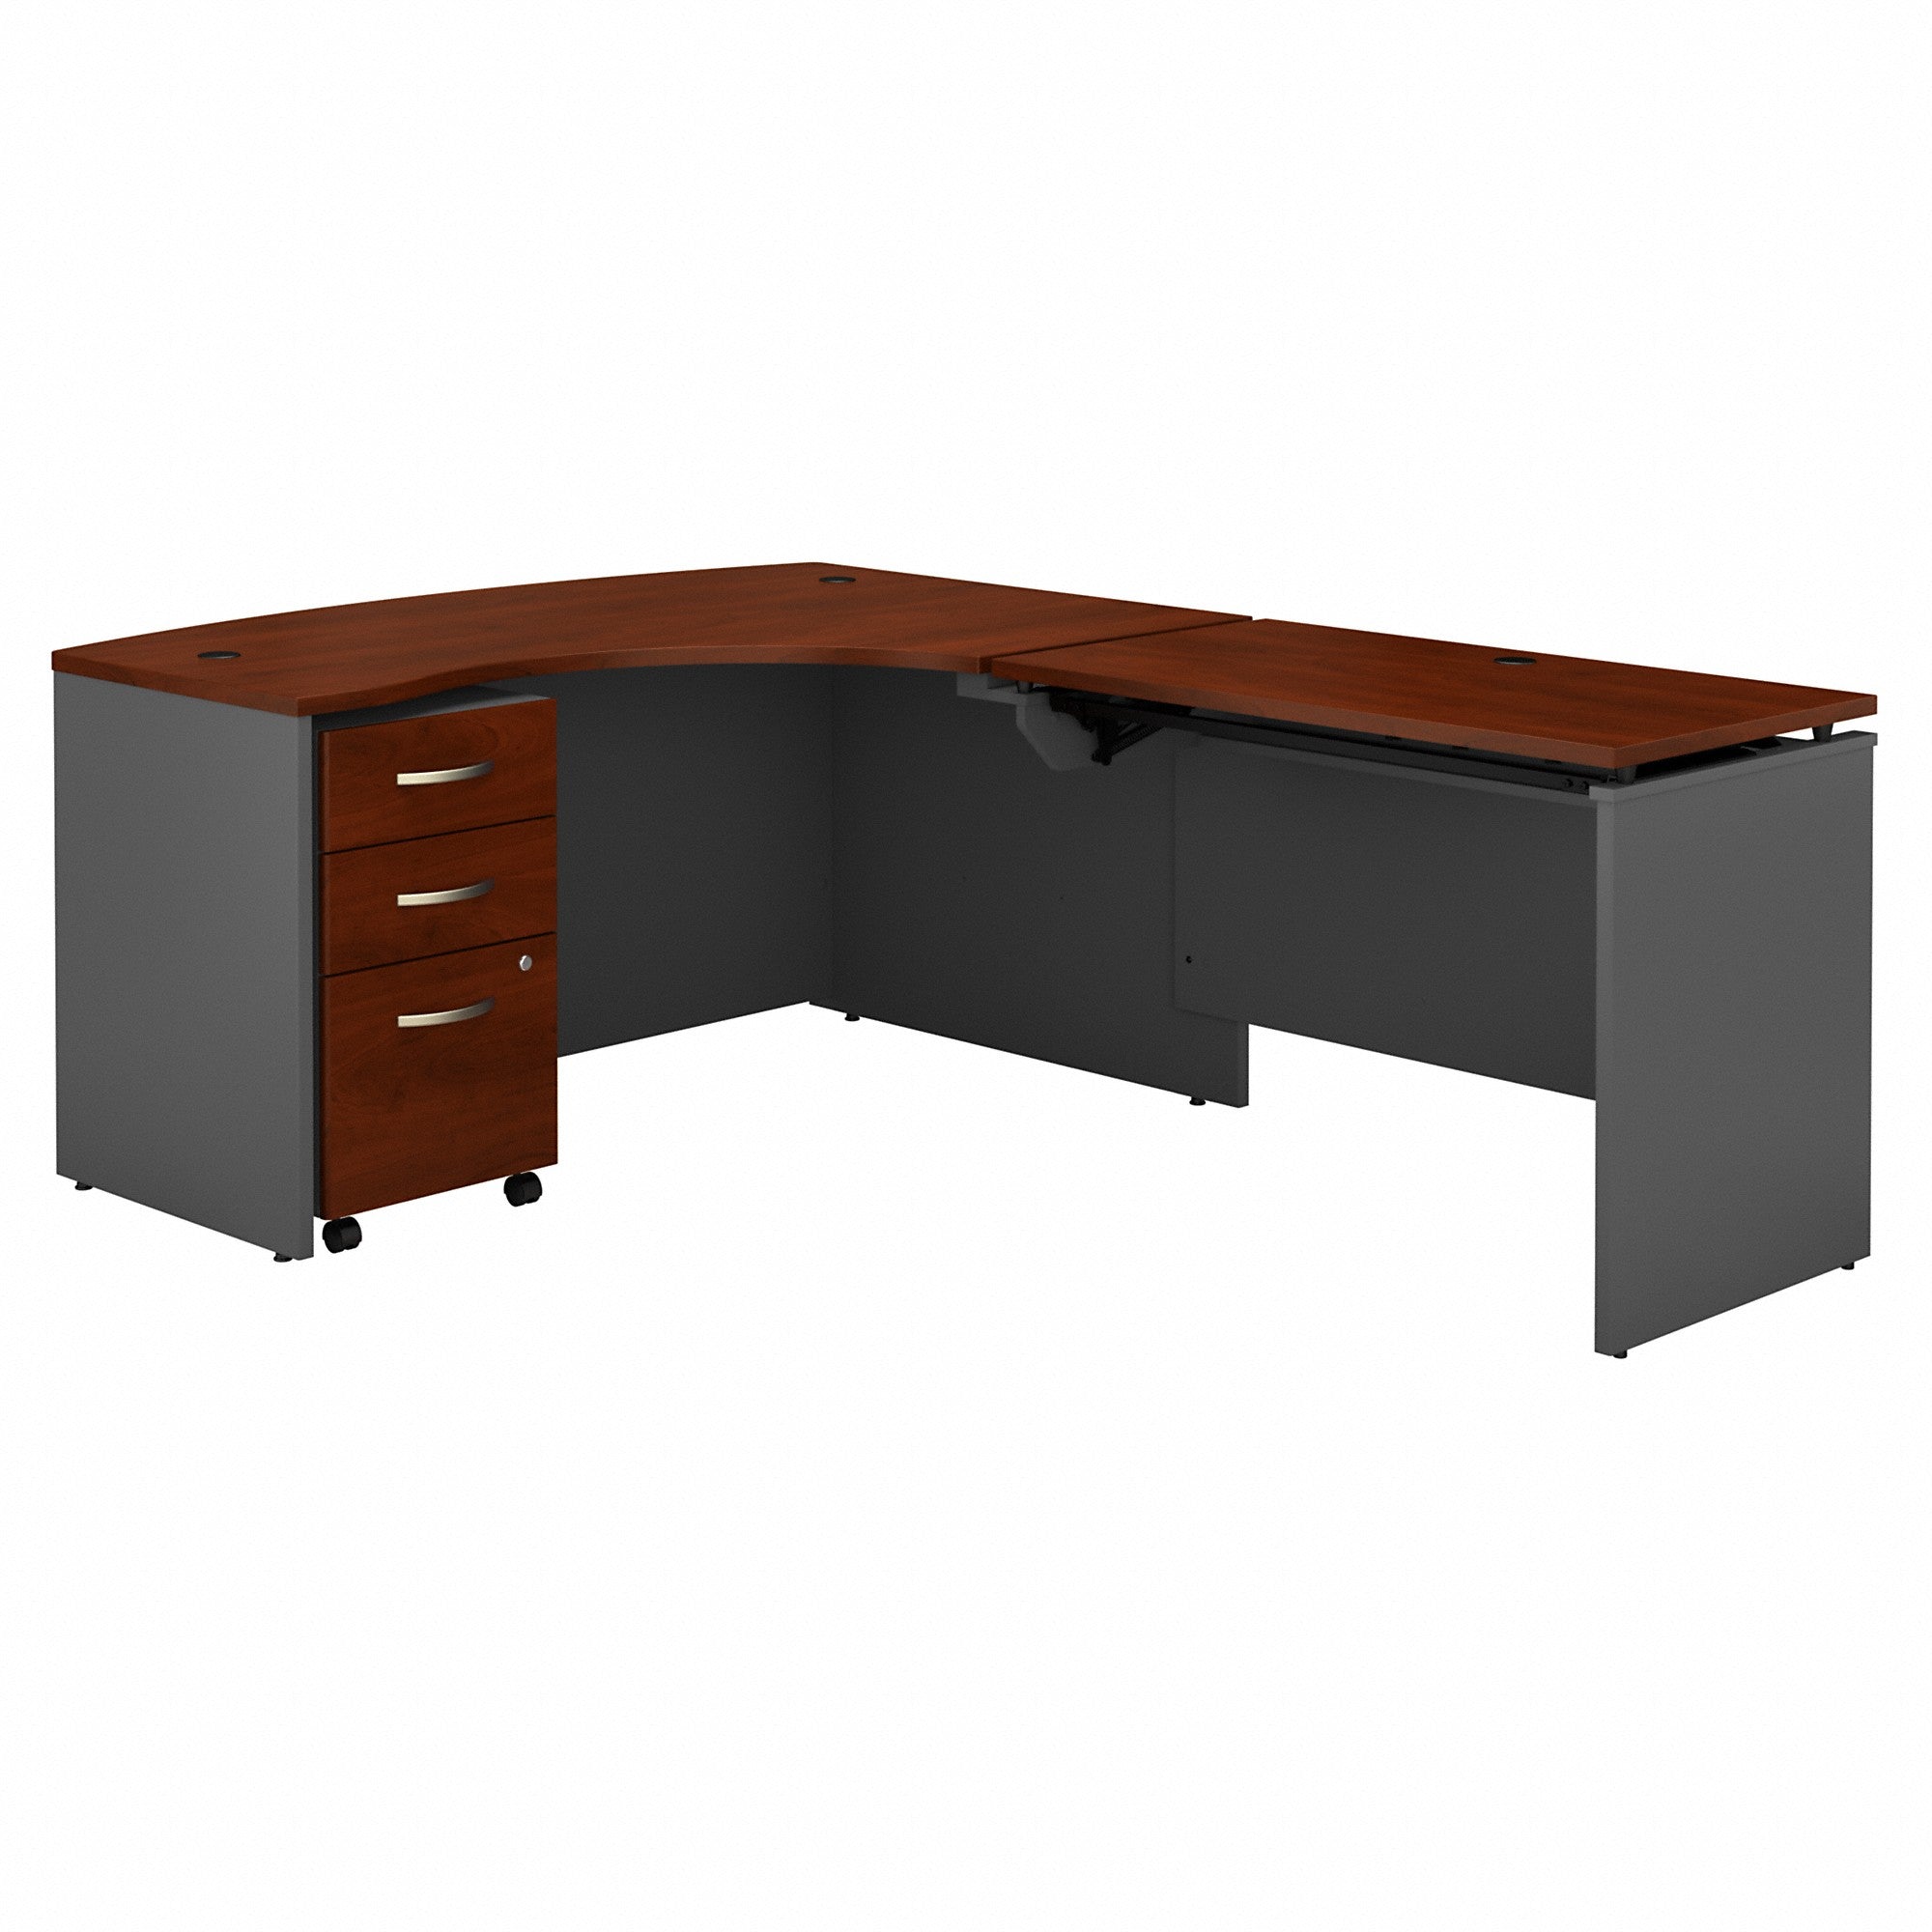 Bush Business Furniture Series C 60W x 43D Right Hand 3 Position Sit to Stand L Shaped Desk with Mobile File Cabinet